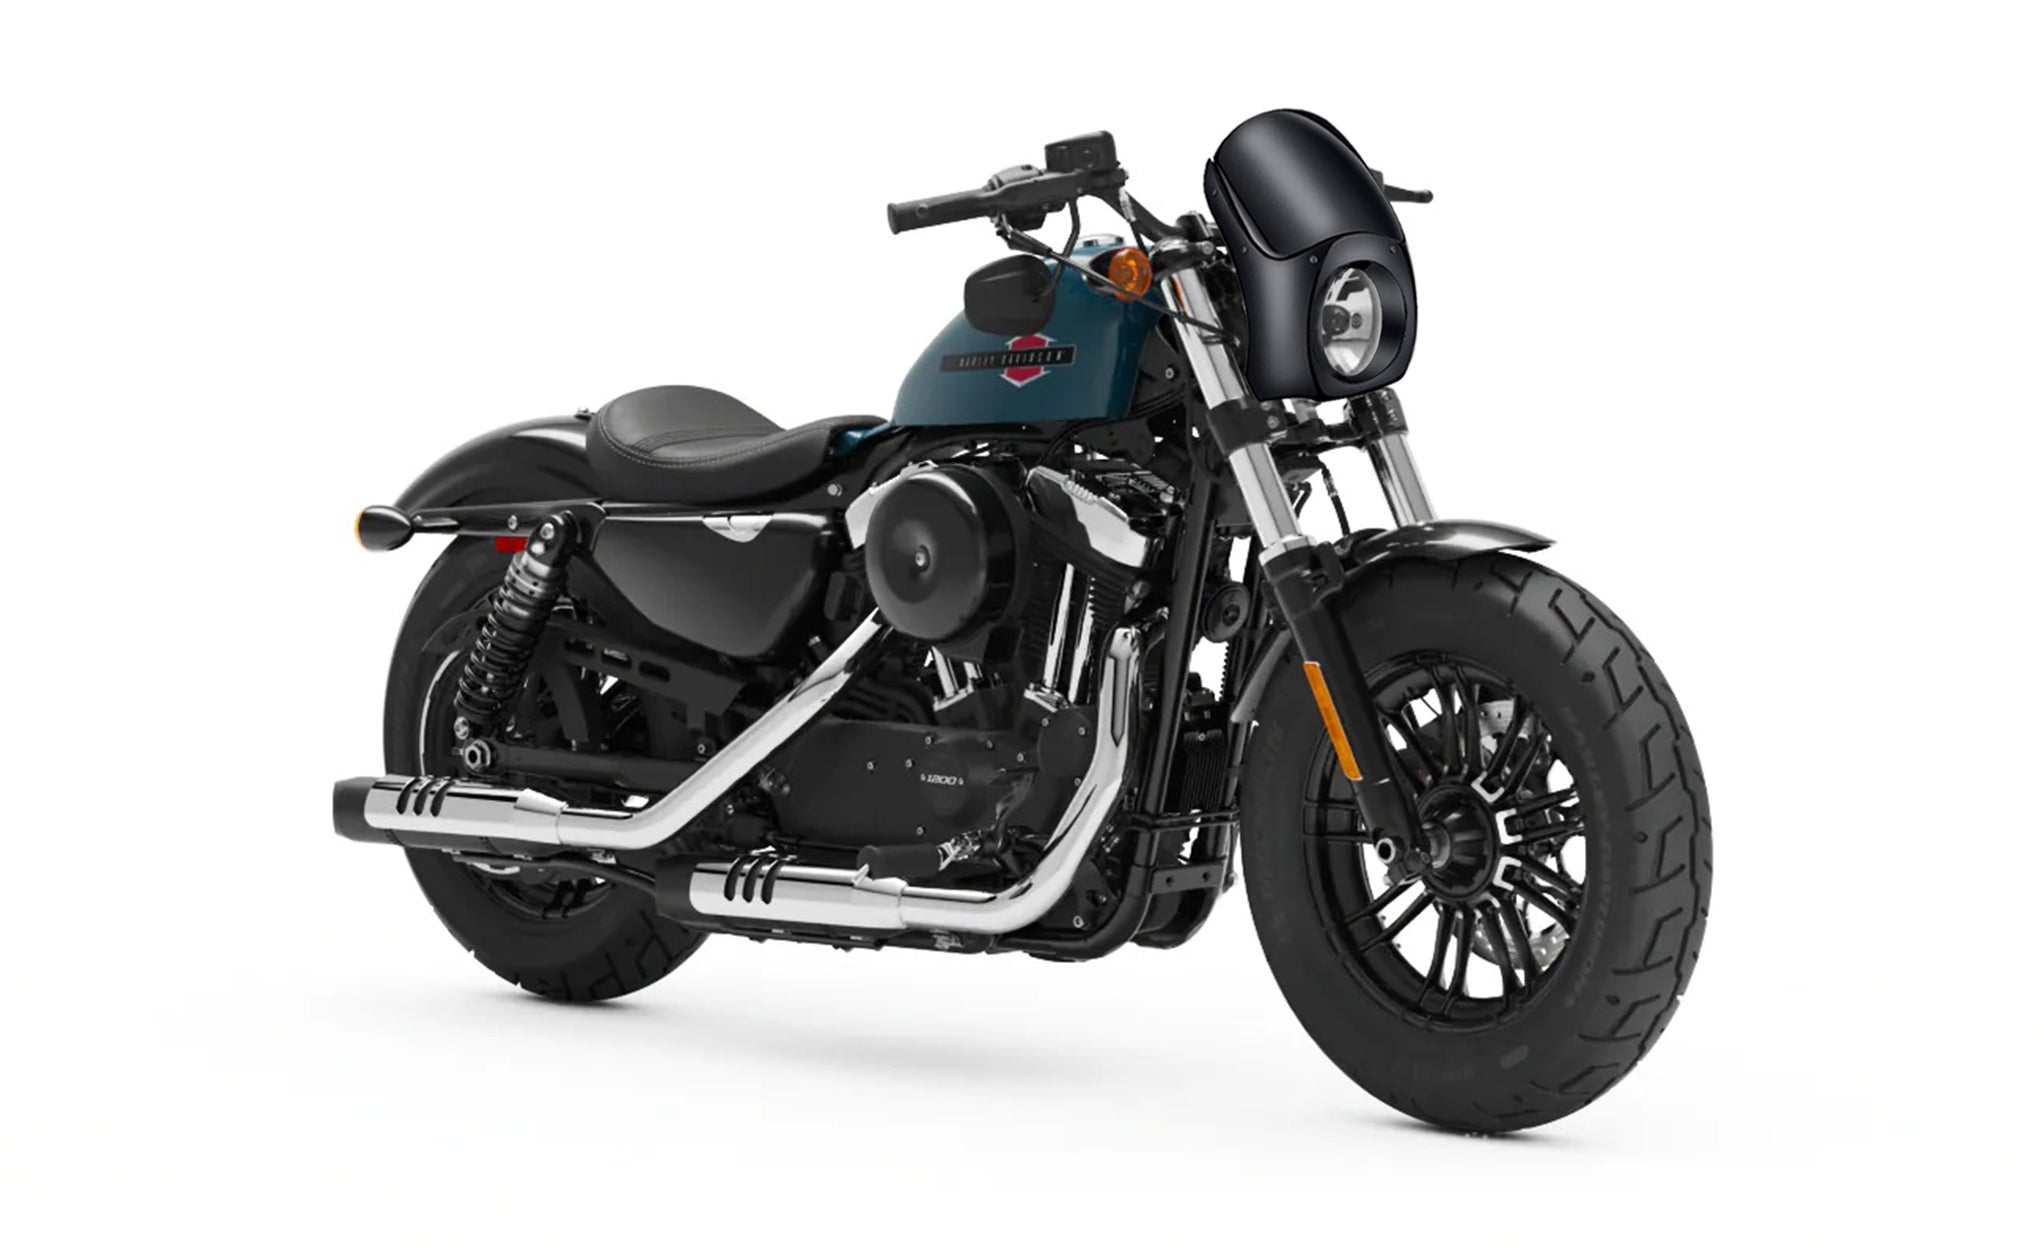 Viking Bronco Motorcycle Fairing For Harley Sportster Forty Eight Gloss Black Bag on Bike View @expand